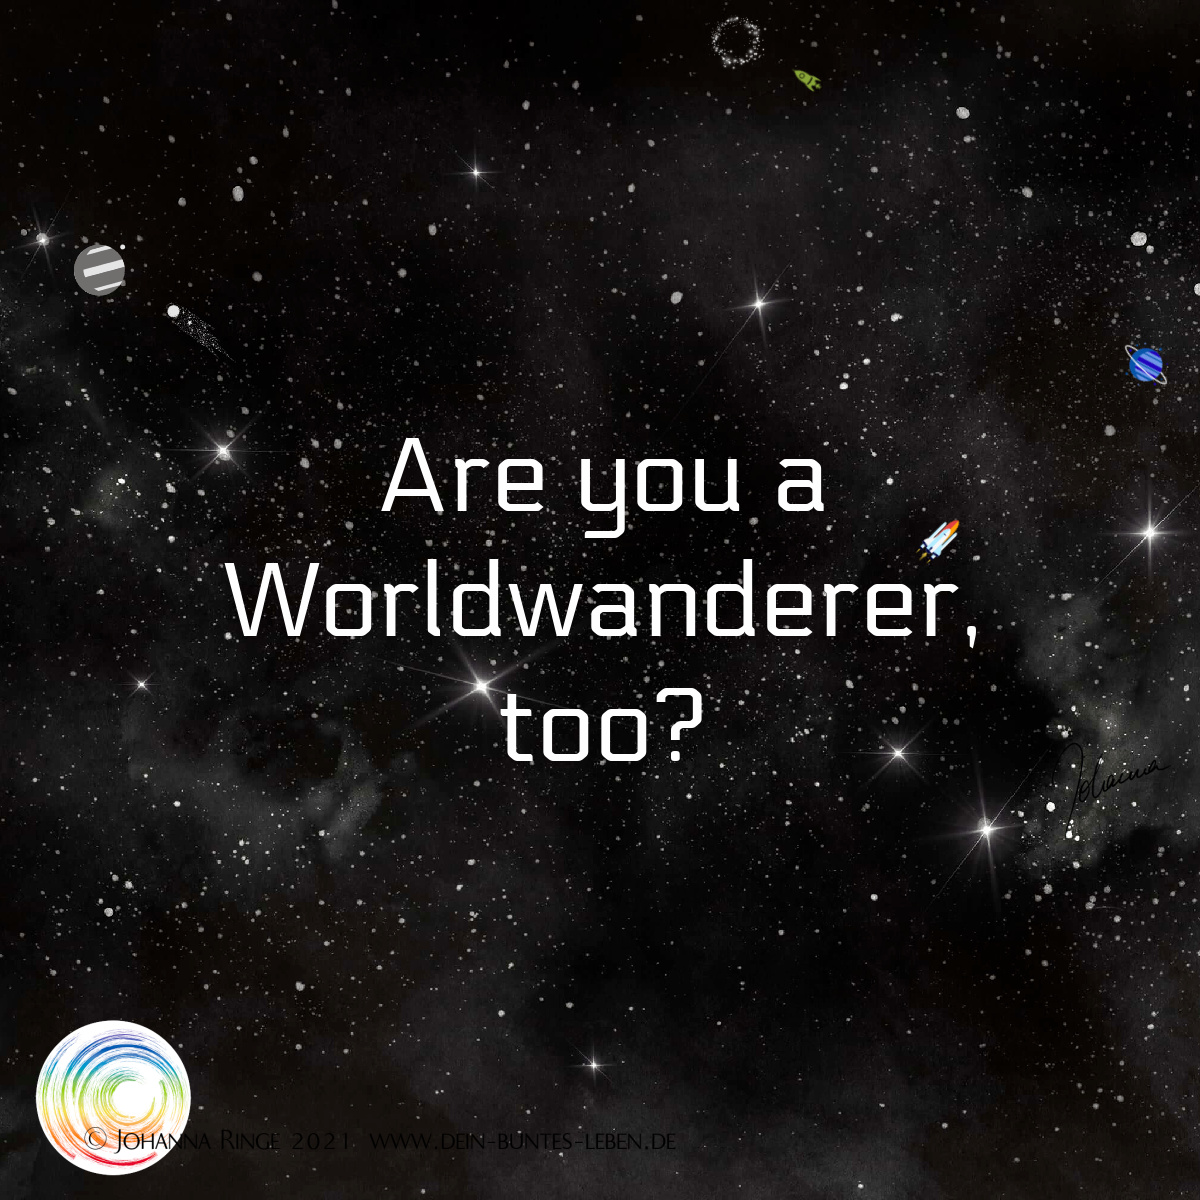 Are you a worldwanderer, too? (text on picture of space with planets and spacecraft) ©Johanna Ringe 2021 www.johannaringe.com